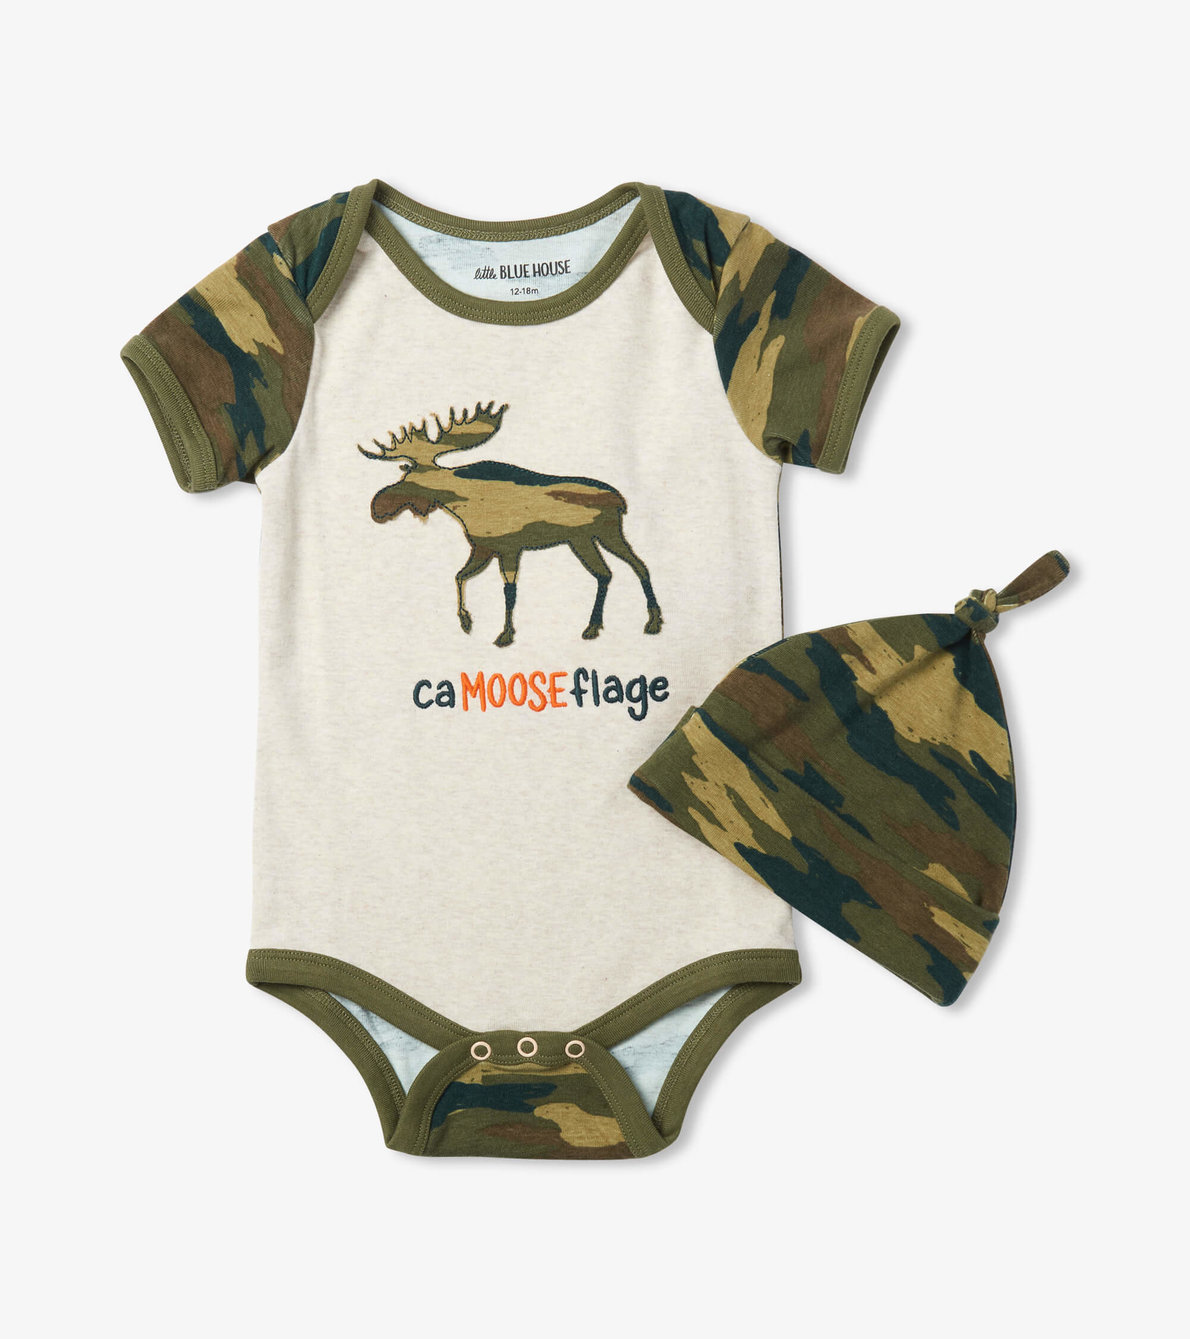 View larger image of Camooseflage Baby Bodysuit With Hat